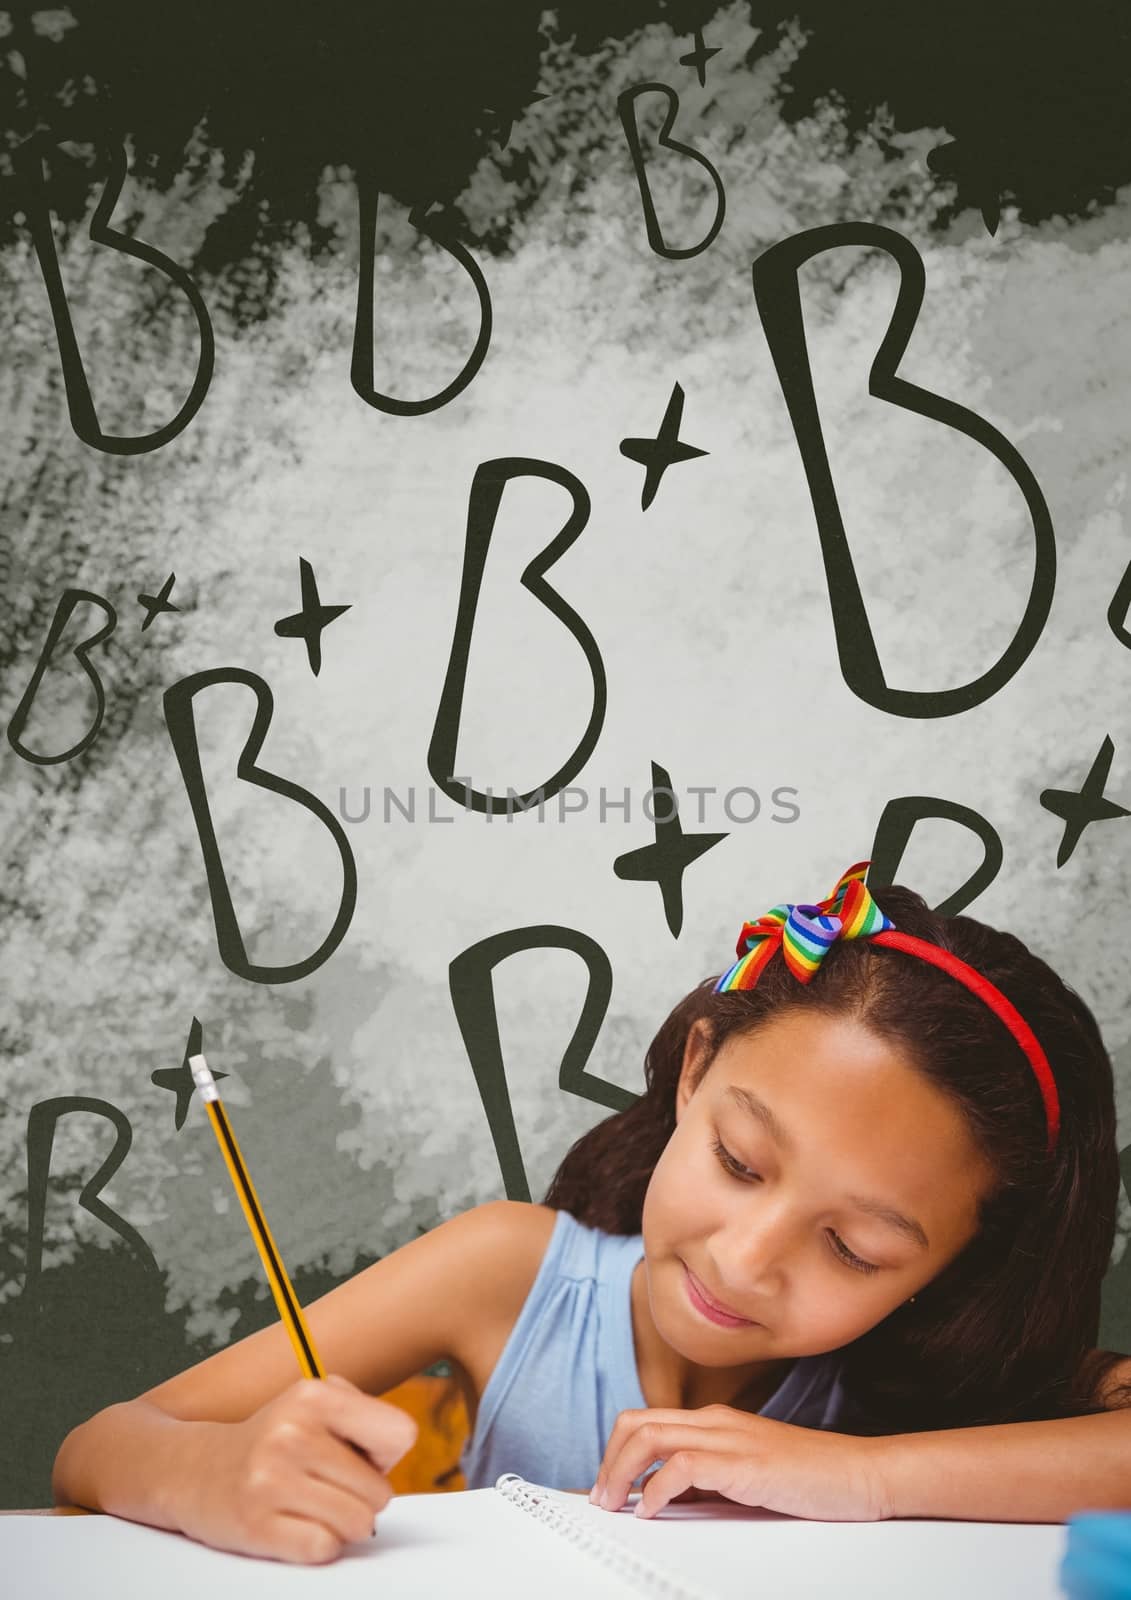 Digital composite of Student girl at table writing against green blackboard with school and education graphic